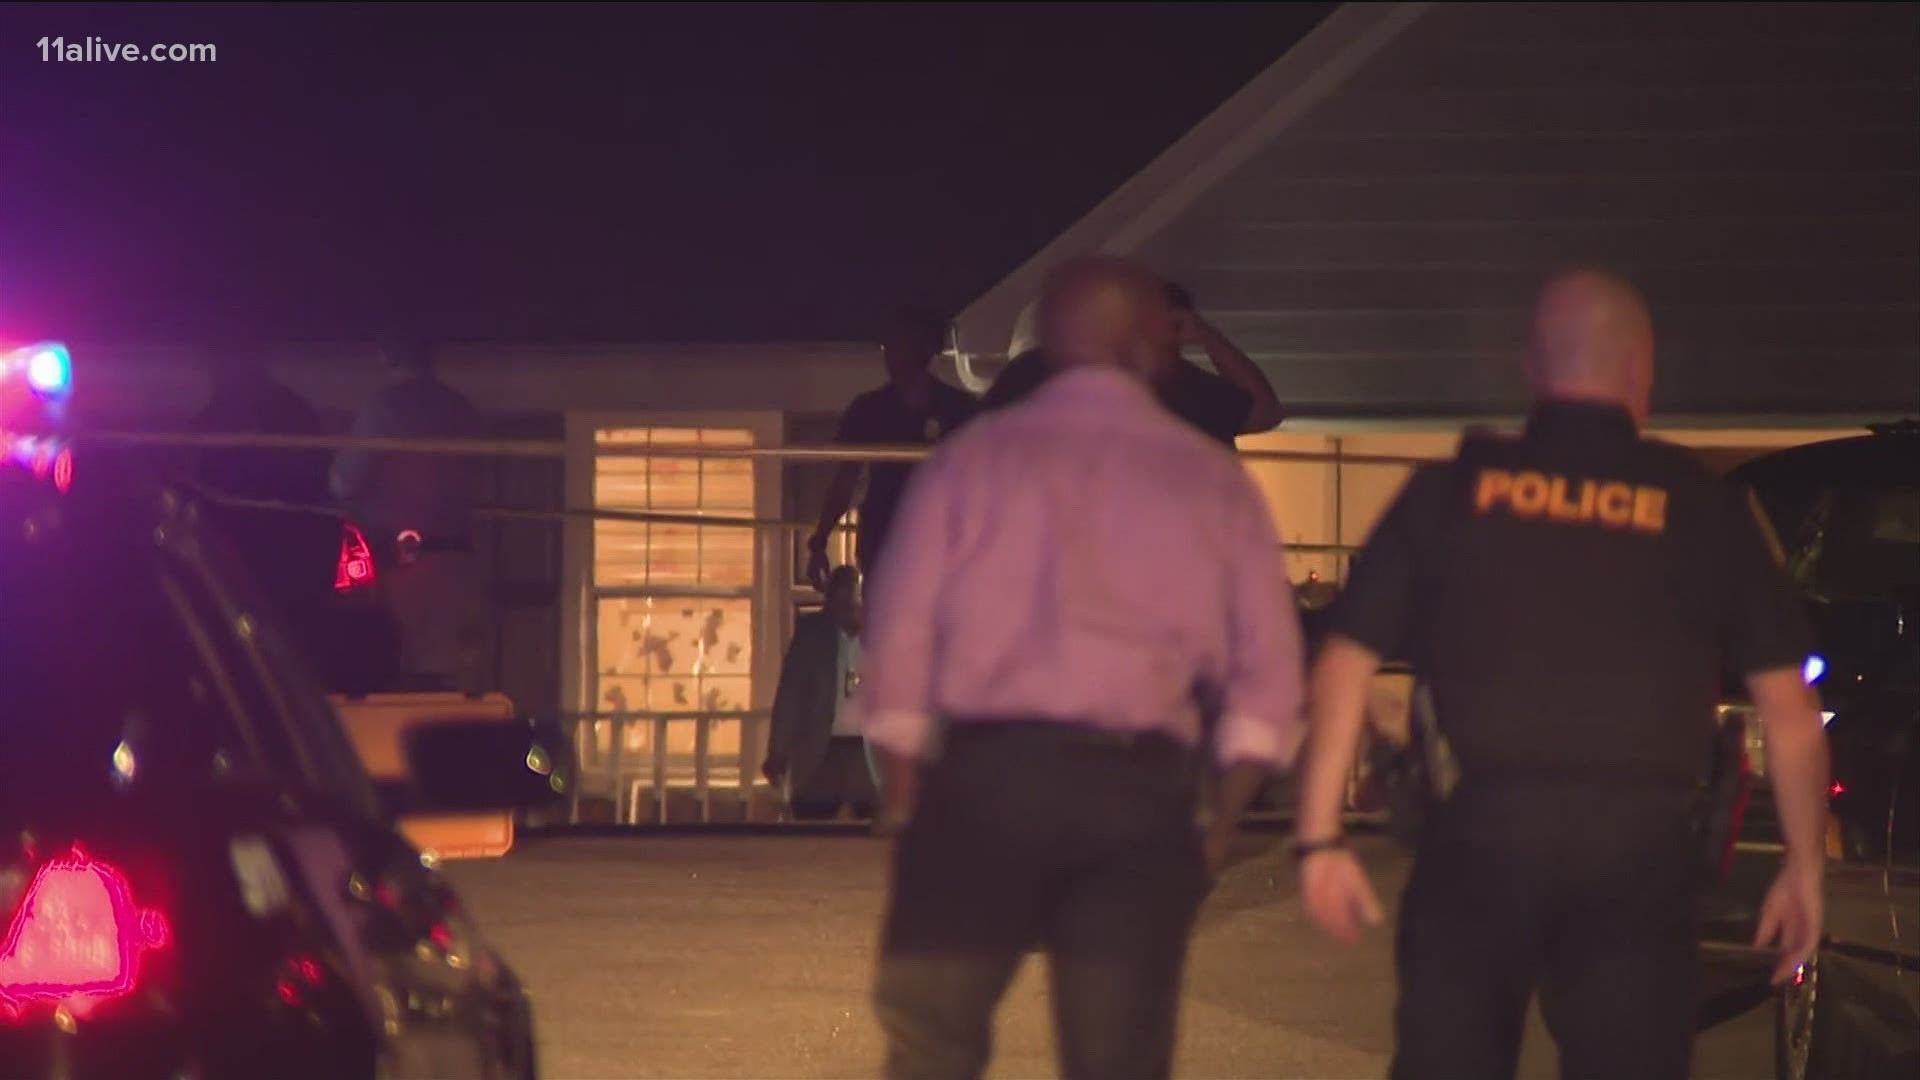 A woman who was shot during a triple shooting at a home in Clayton County on Wednesday evening has died, according to Clayton County authorities.